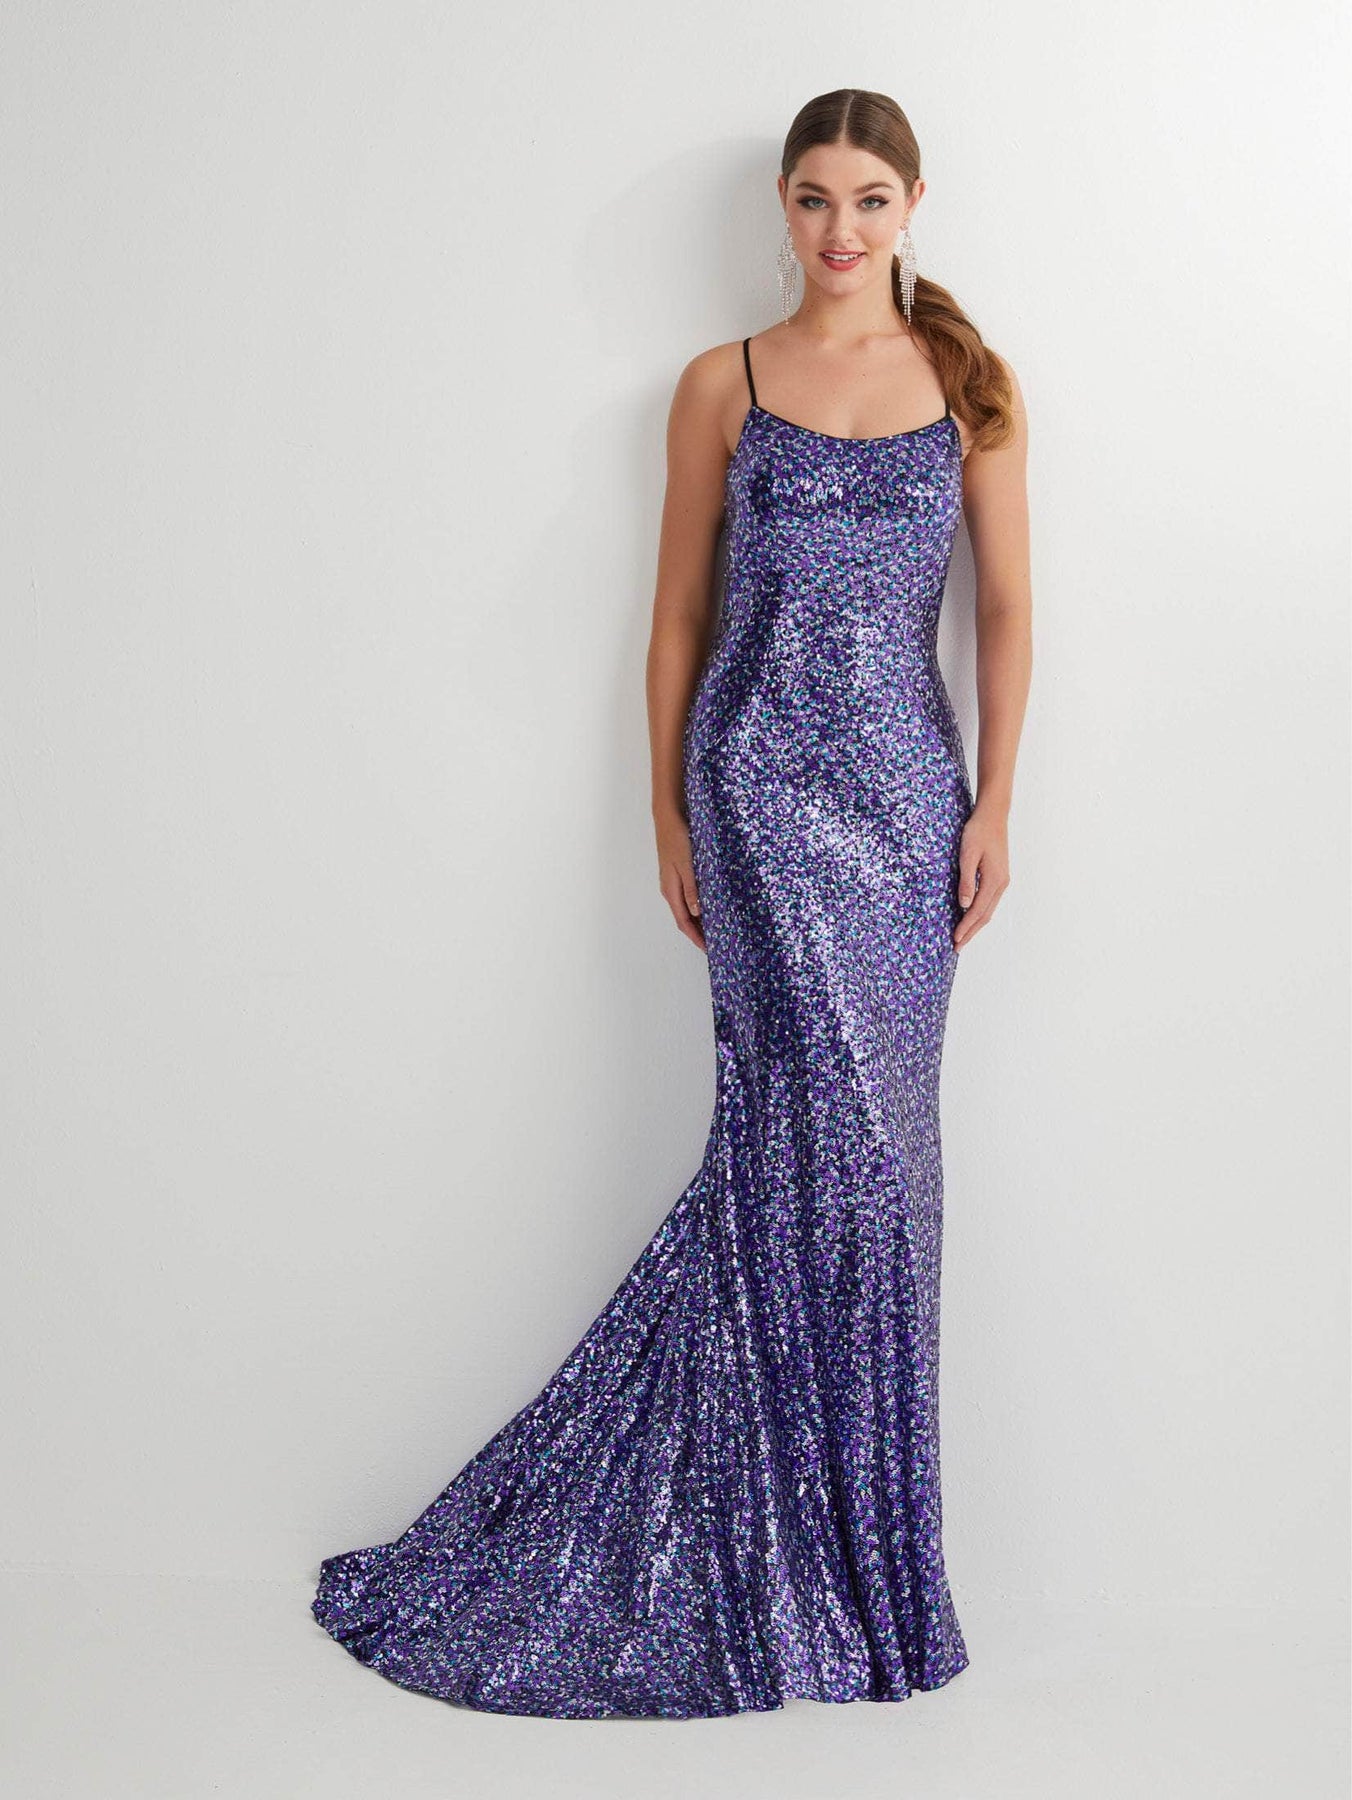 Studio 17 Prom 12914 - Sleeveless Scoop Neck Evening Gown Special Occasion Dress